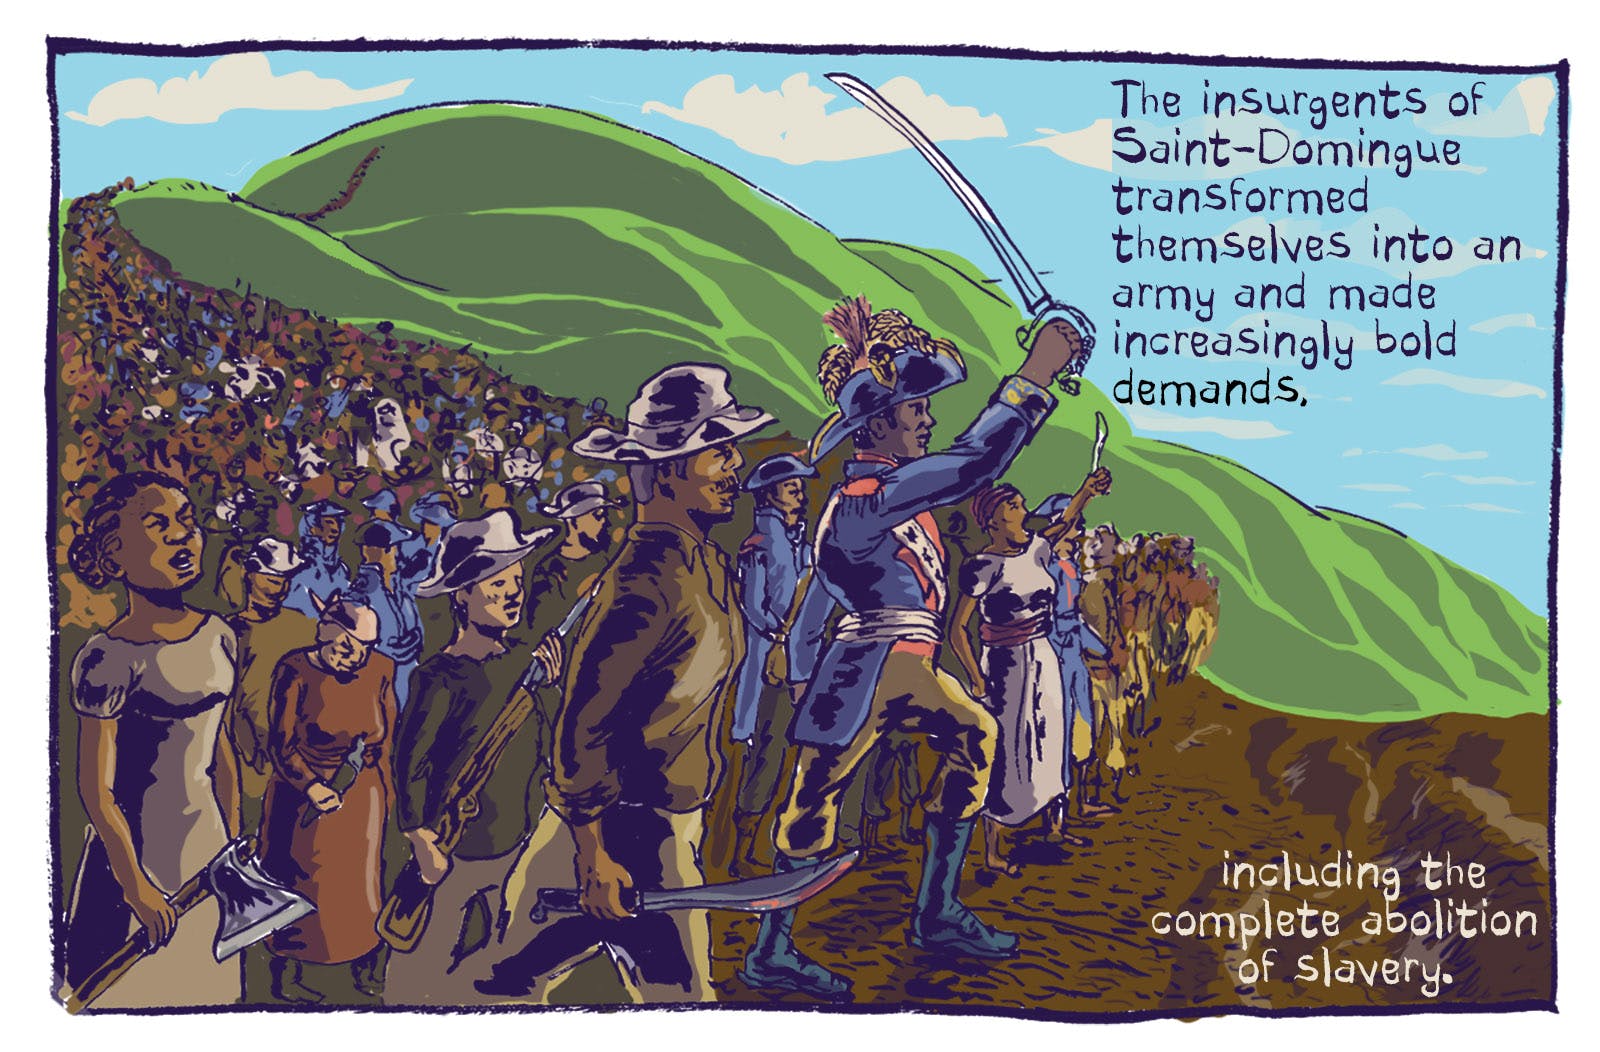 “We Have Dared to be Free”: Teaching the Haitian Revolution